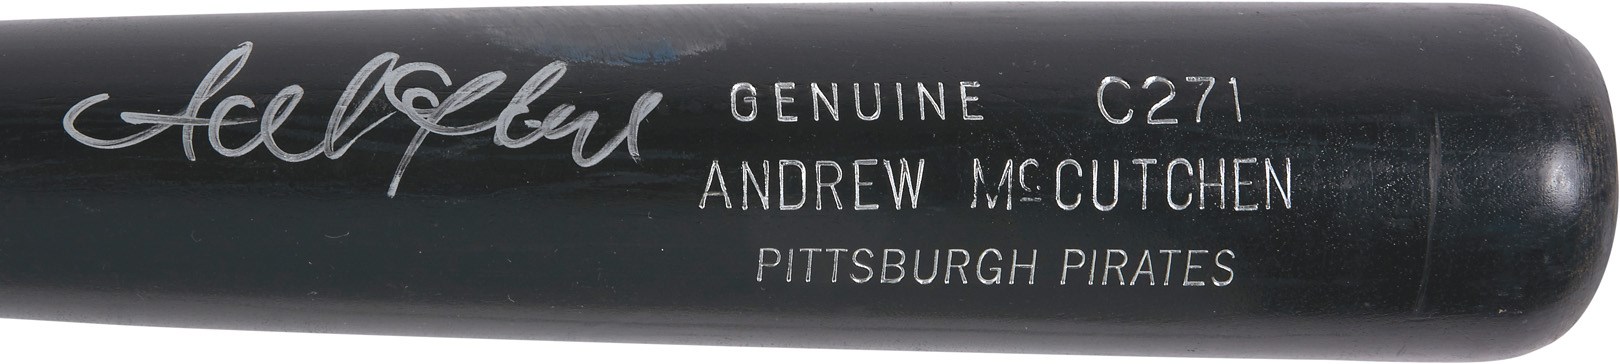 Clemente and Pittsburgh Pirates - Circa 2008 Andrew McCutchen Signed Game Used Bat (PSA GU 8.5)